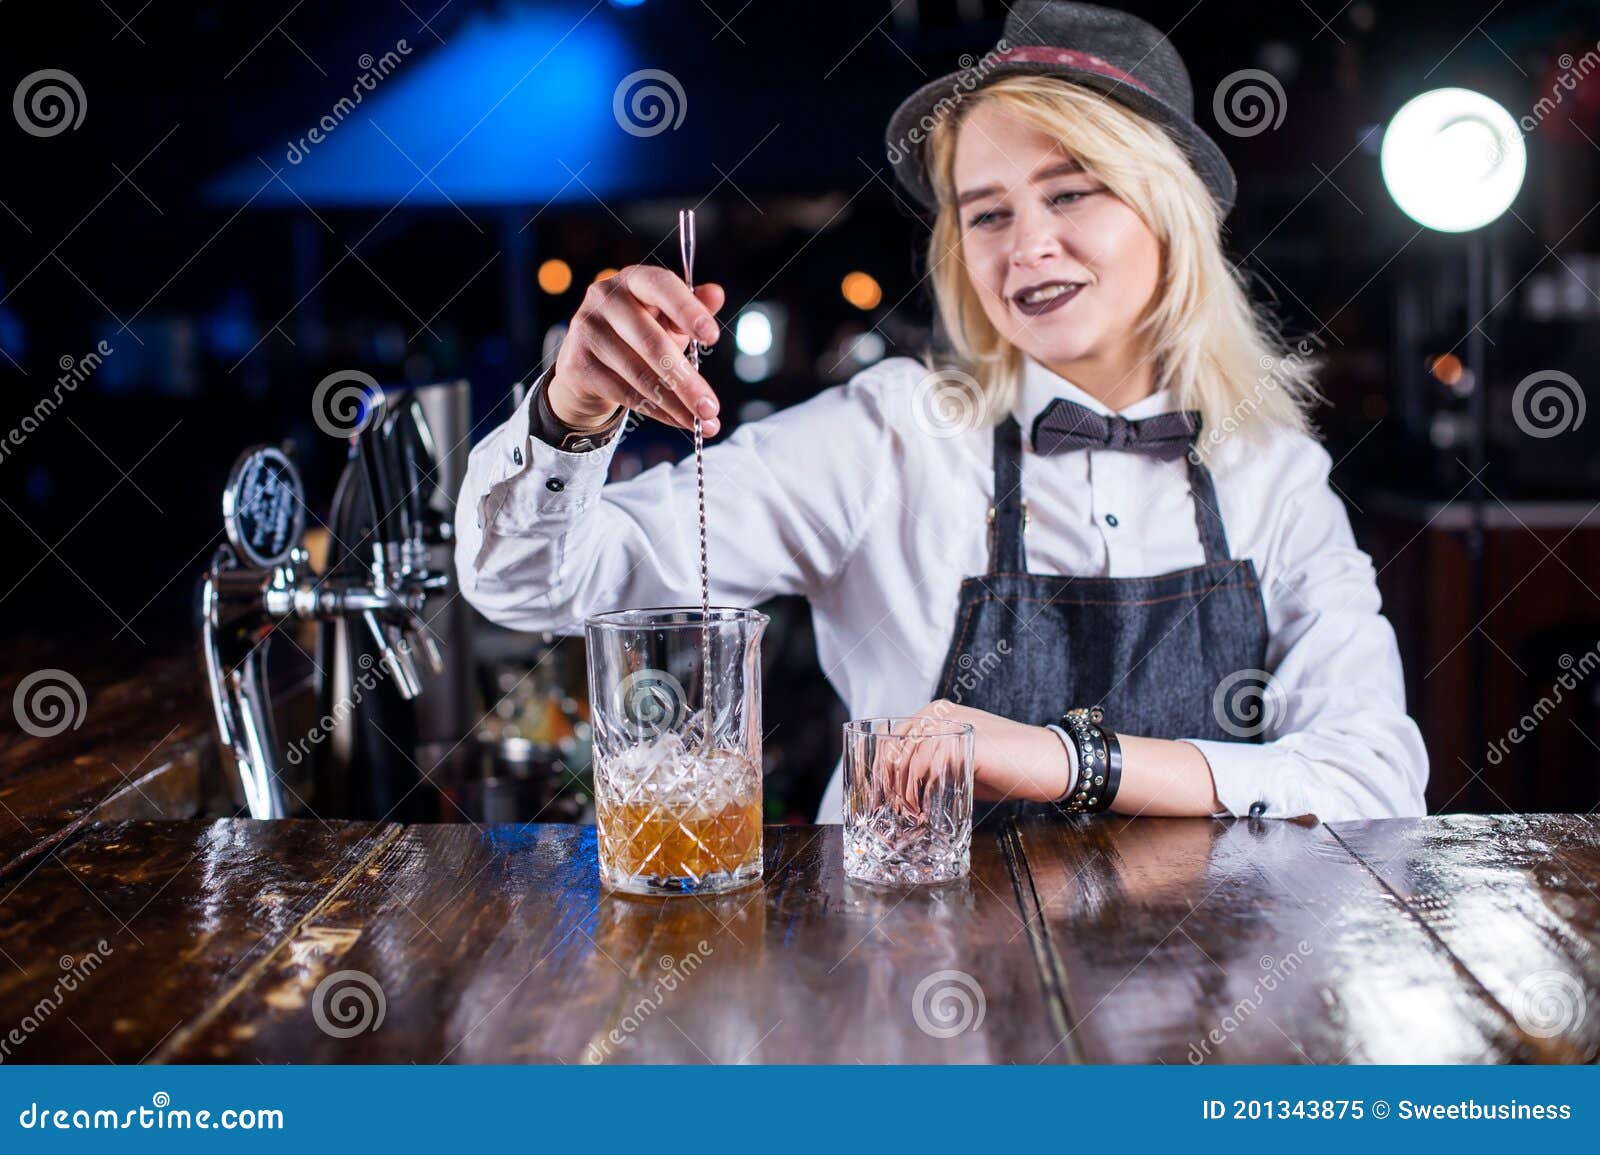 Professional Woman Bartender is Pouring a Drink Stock Image - Image of ...